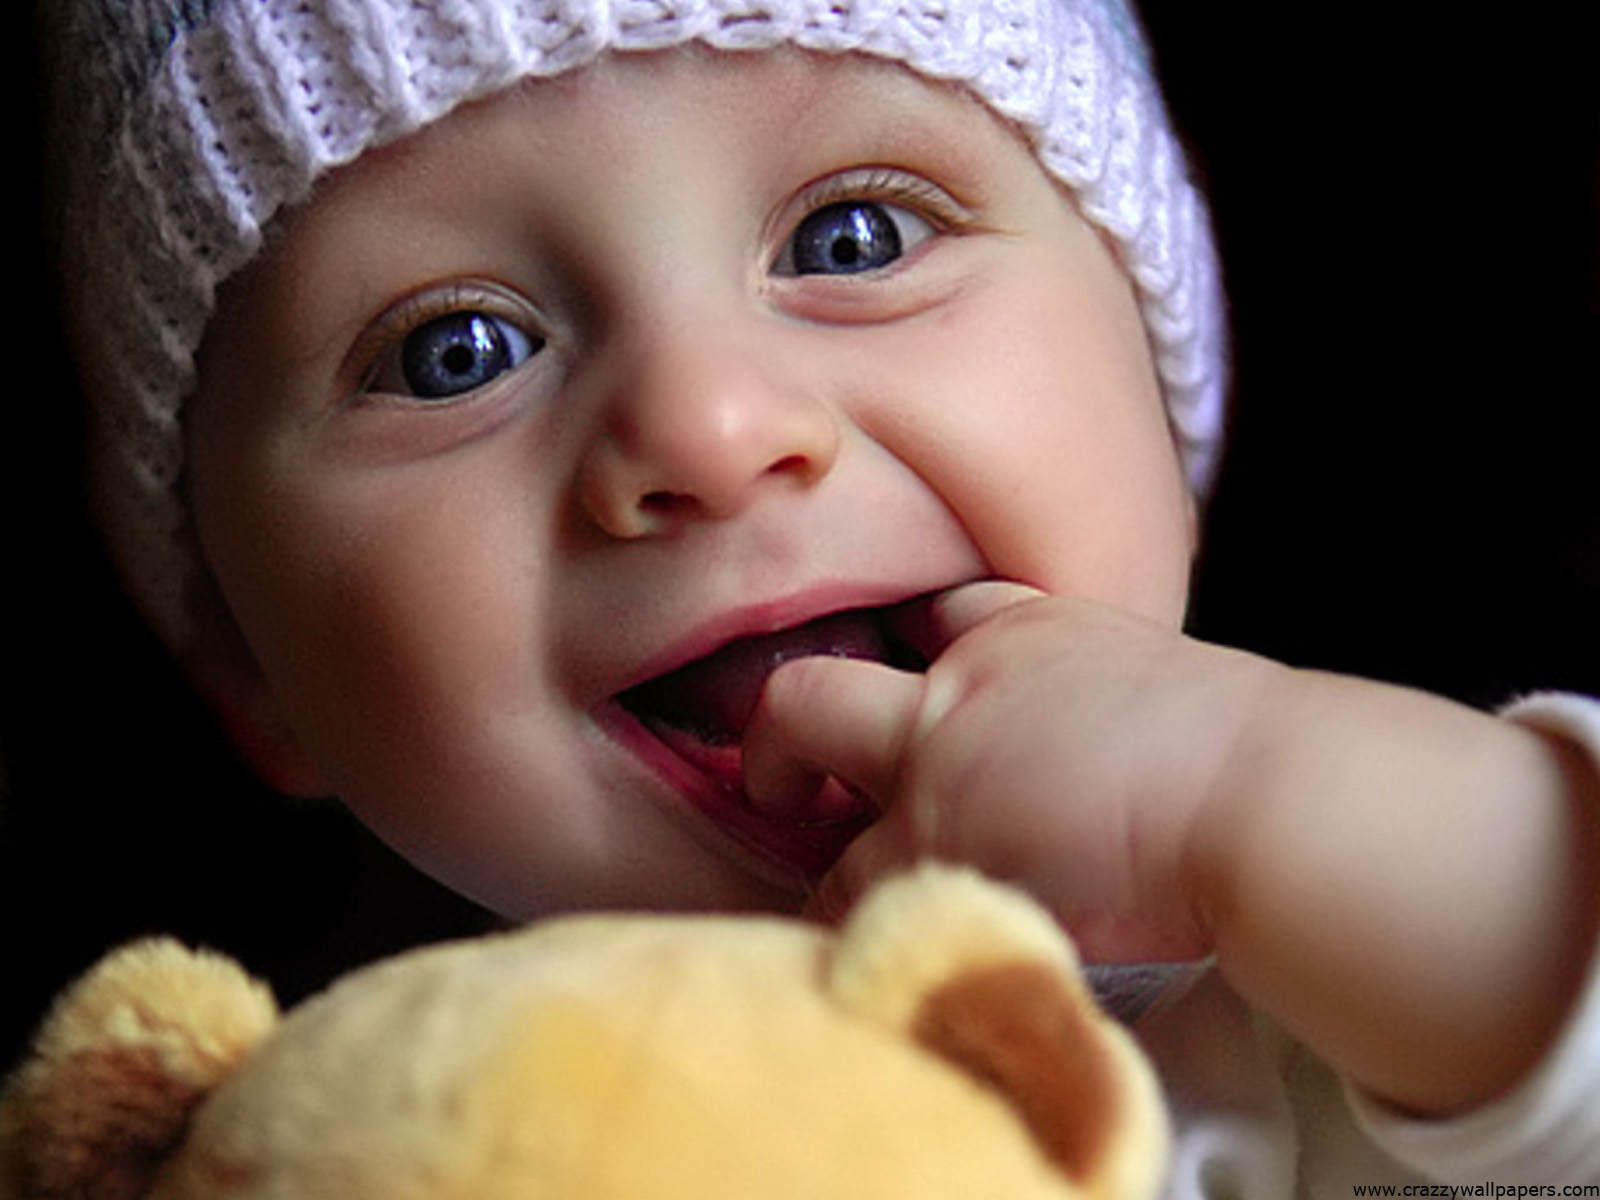 Baby Boy Wallpapers Free Download - Cute Baby Wallpaper Funny - HD Wallpaper 